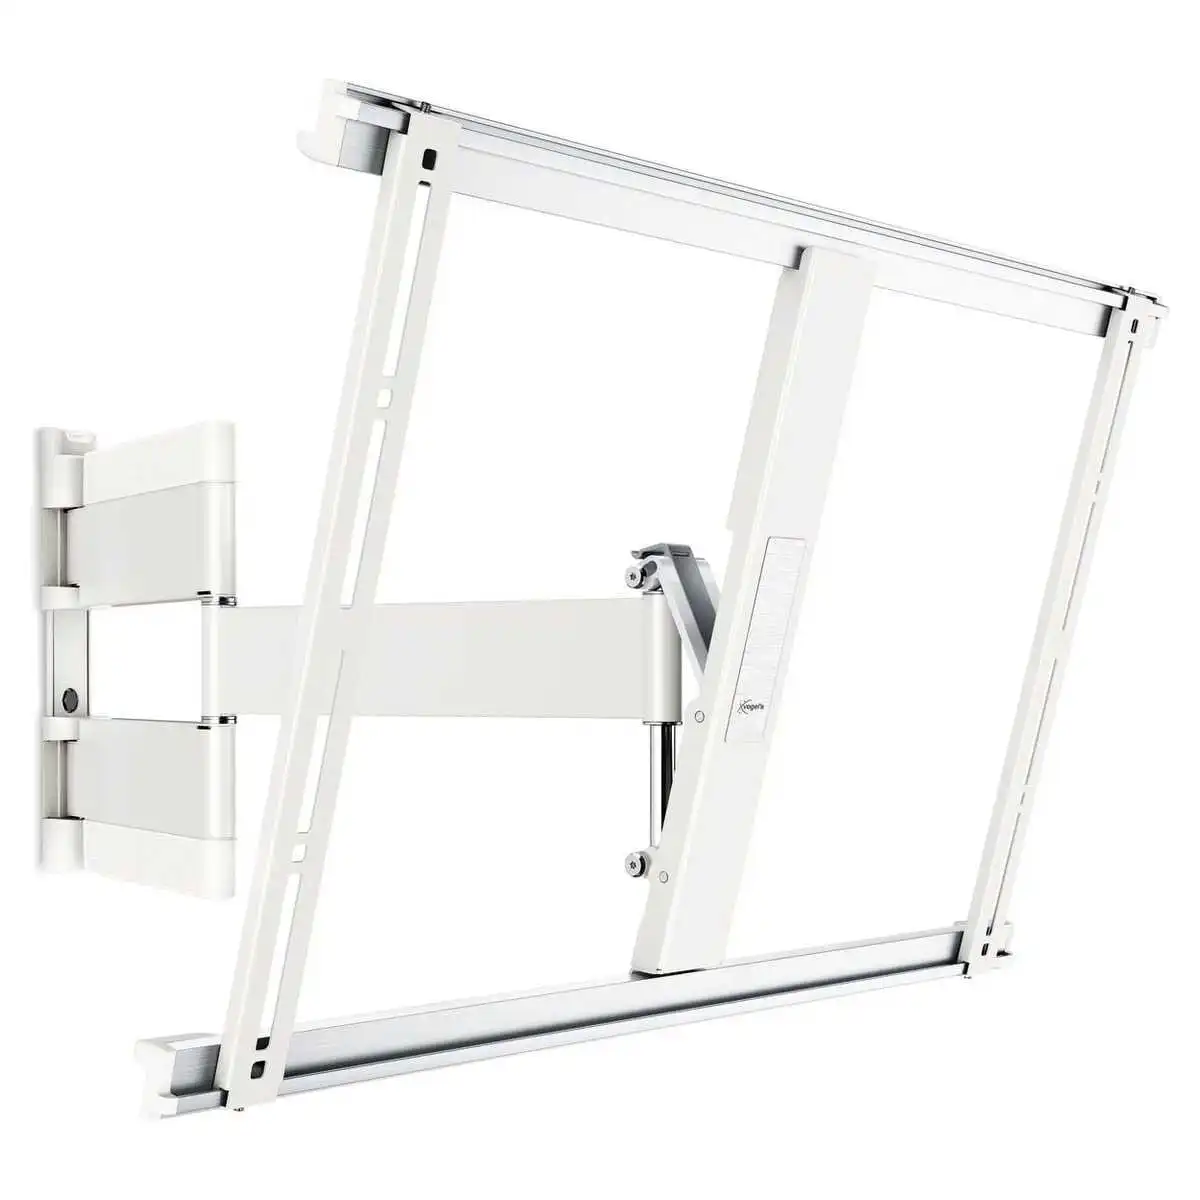 Vogel's Extra Thin Full Motion TV Wall Mount For 40 to 65 Inch TVs White